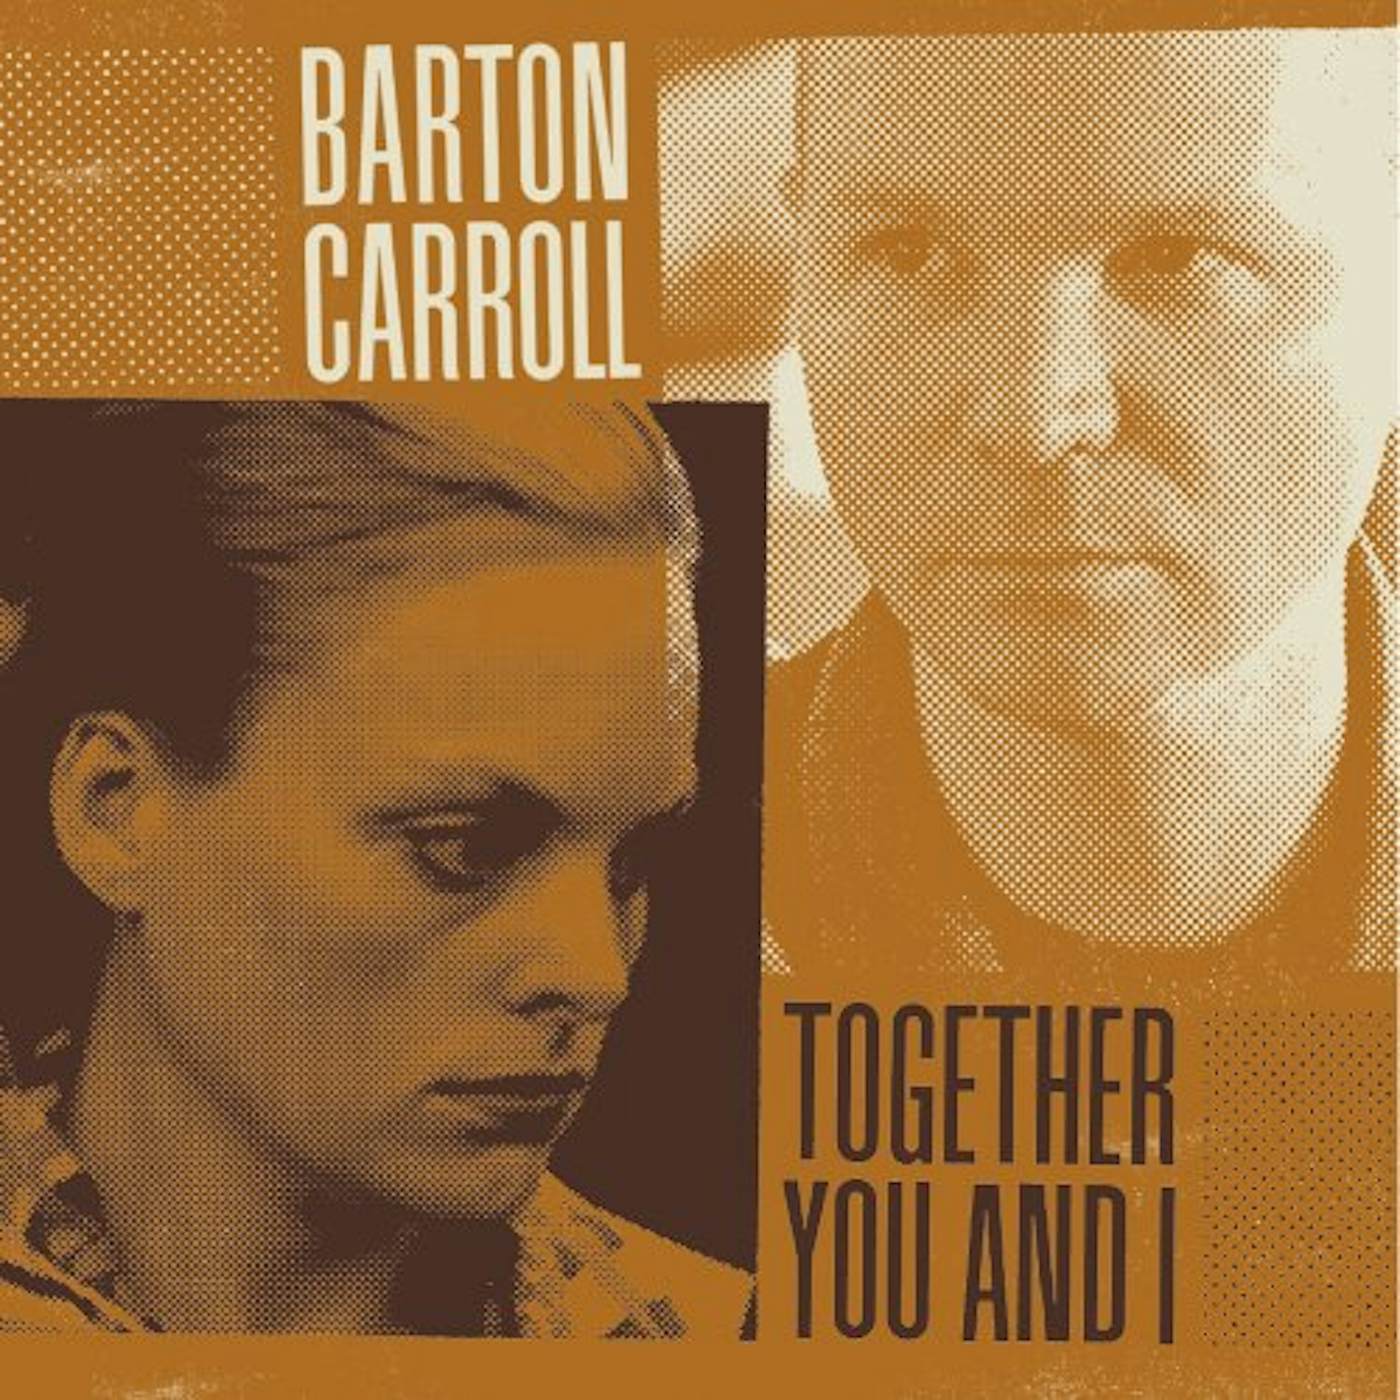 Barton Carroll Together You and I Vinyl Record